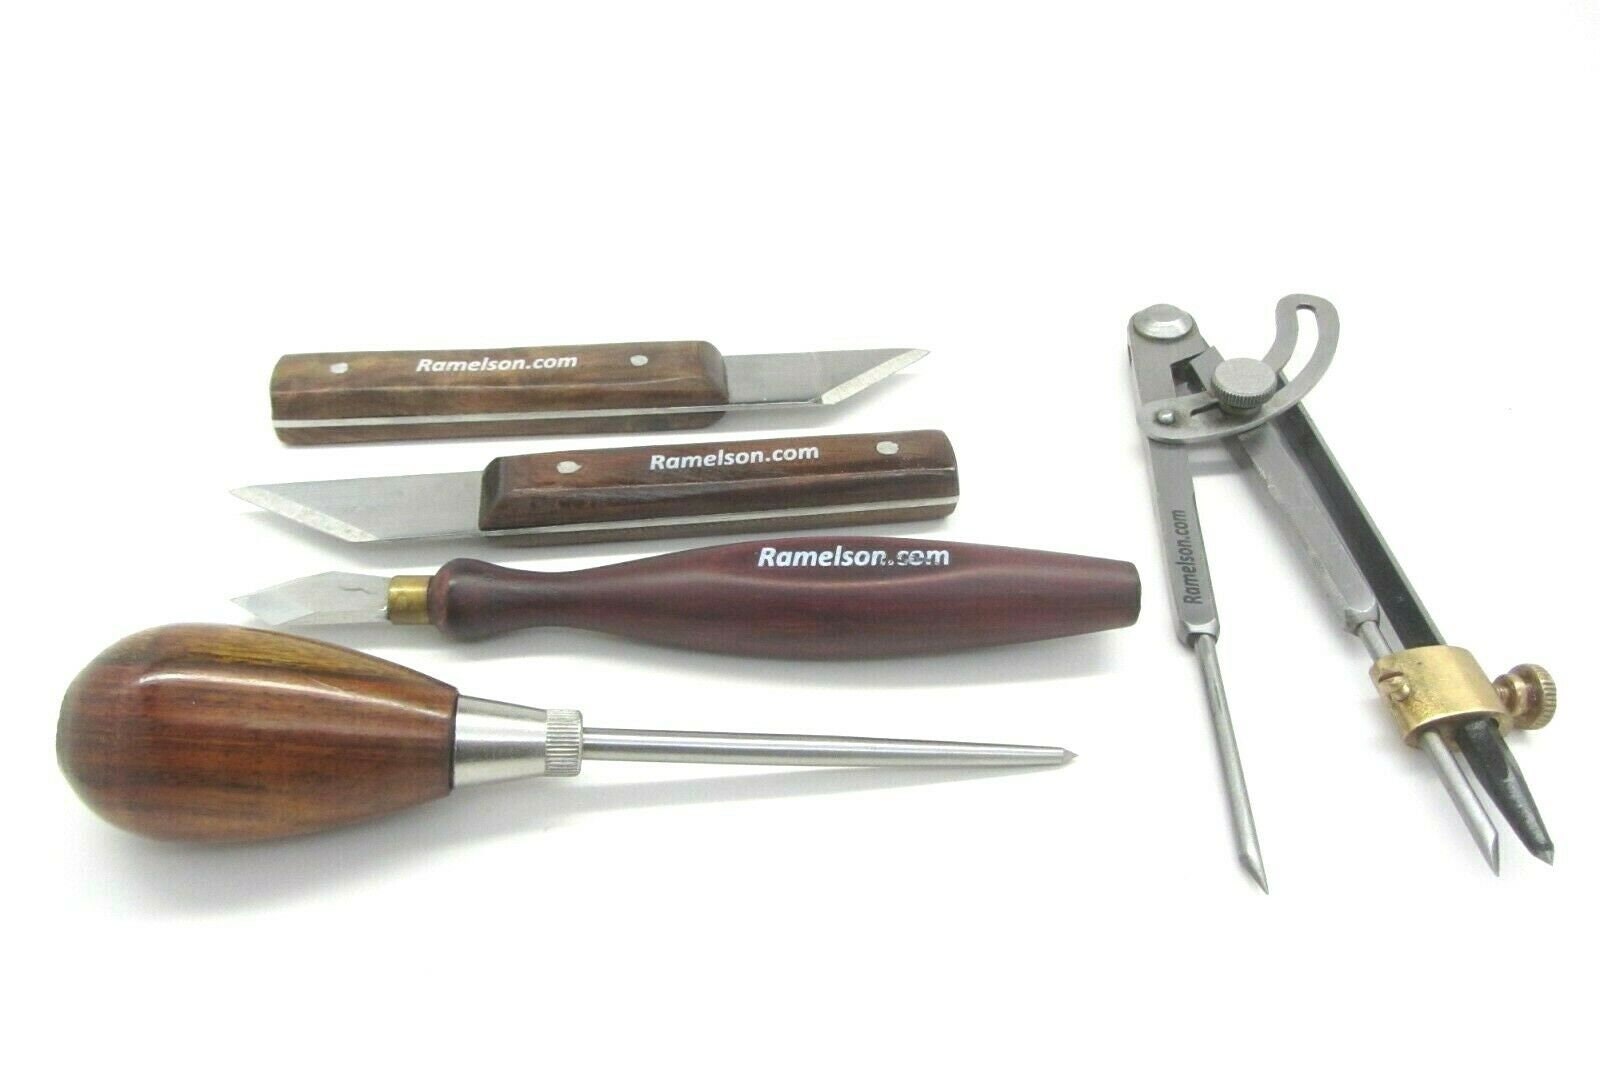 5 PC Chip Set - Wood Carving Knives and 5 Pocket Leather Tool Roll - Woodcarving, Whittling, Decoy, DIY Crafts